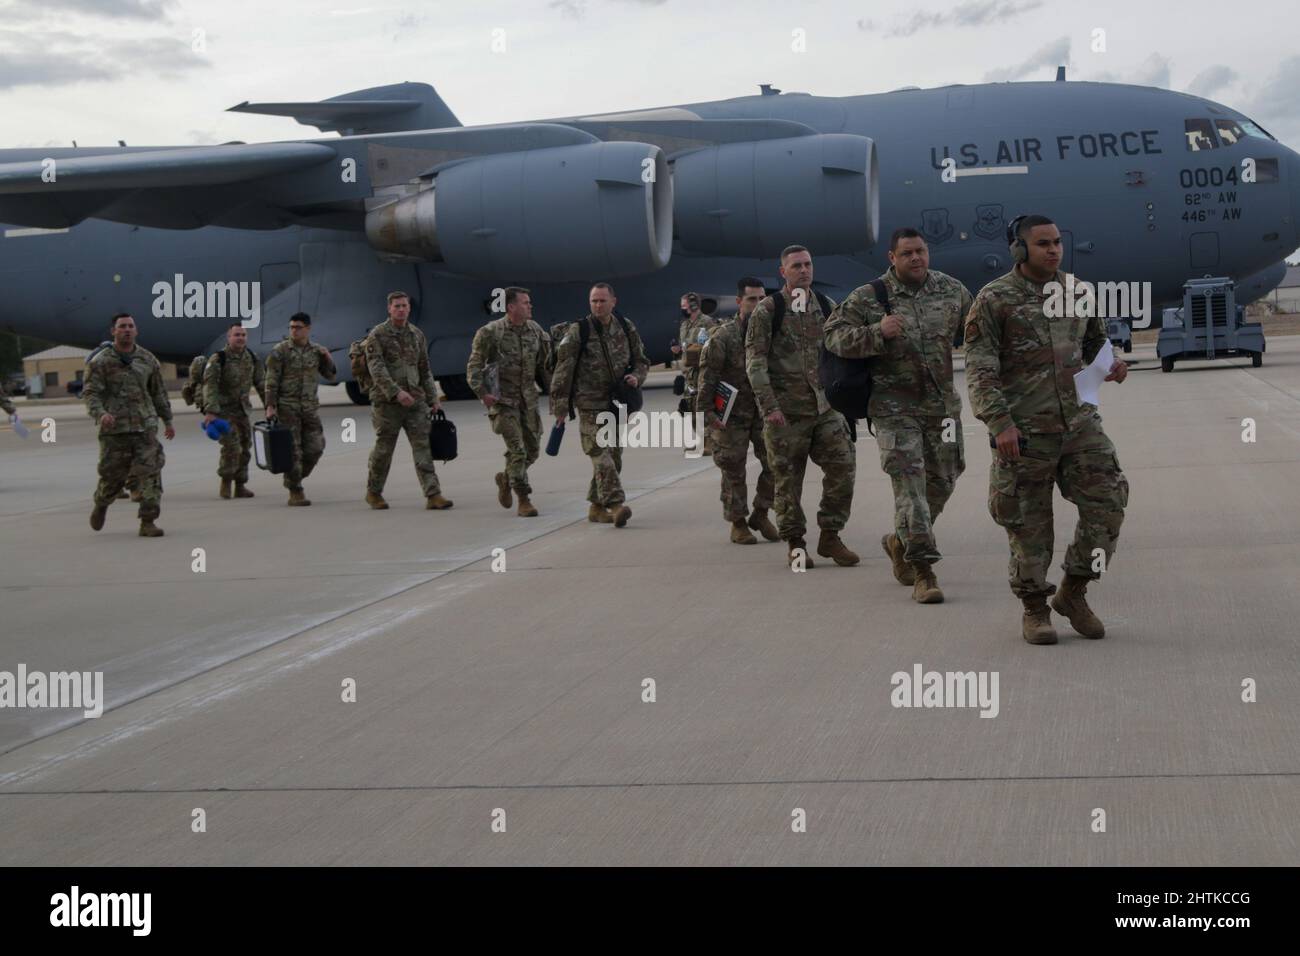 Fort Bragg, United States. 03 February, 2022. U.S. Army paratroopers, with the 82nd Airborne Division, board a C-17 Globemaster III transport aircraft for deployment to Poland from Fort Bragg airfield, February 3, 2022 in Fort Bragg, North Carolina. The soldiers are deploying to Eastern Europe in support of NATO allies and deter Russian aggression toward Ukraine. Credit: Sgt. Erin Conway/U.S Army/Alamy Live News Stock Photo